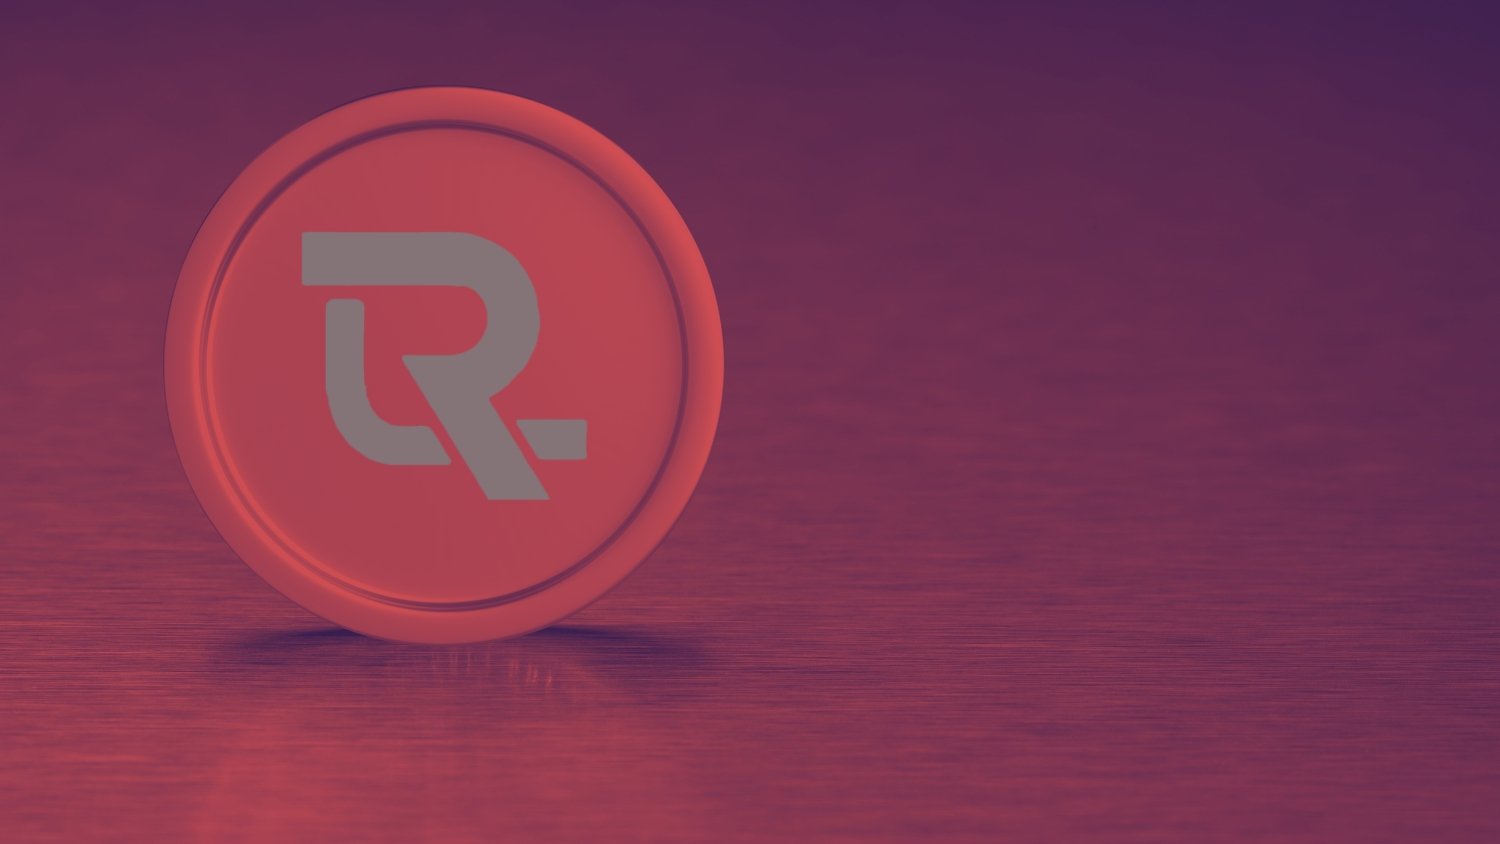 Ruby Asset-Navigating the Crypto Sea Ruby Asset Shines as One of the Top Cryptos to Invest In